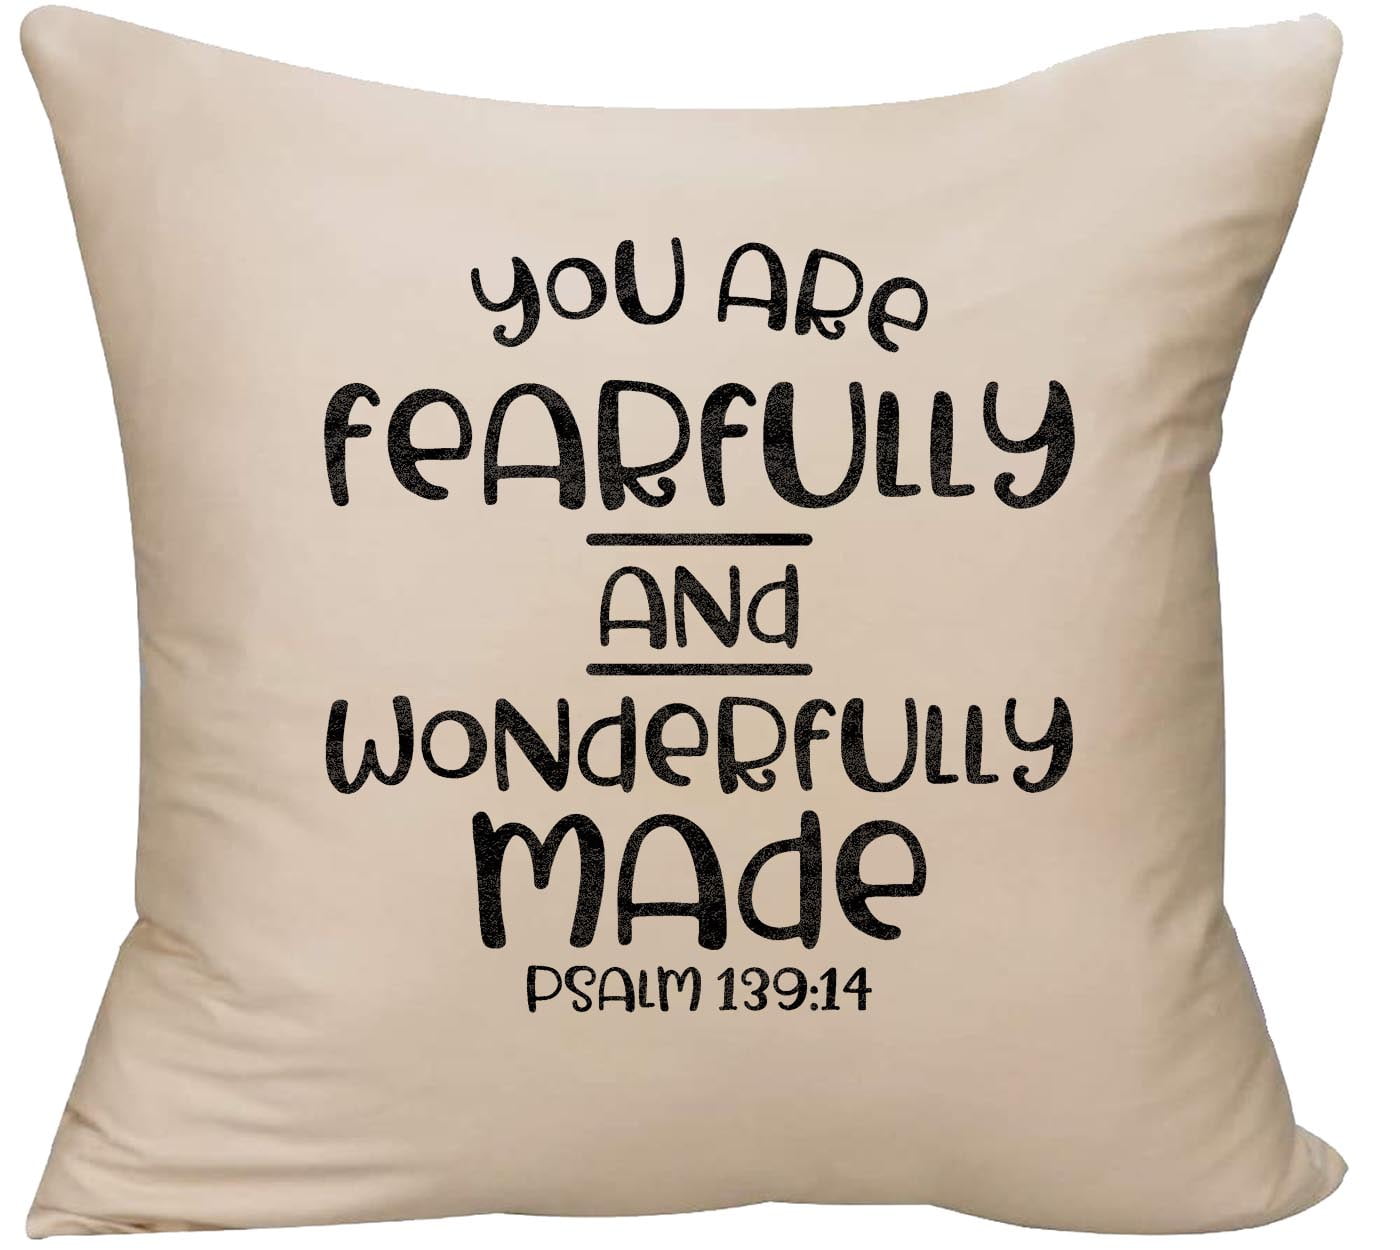 18x18 Multicolor Funny Saying Novelty Design Colored Saying Jesus Coffee and Cattle Throw Pillow